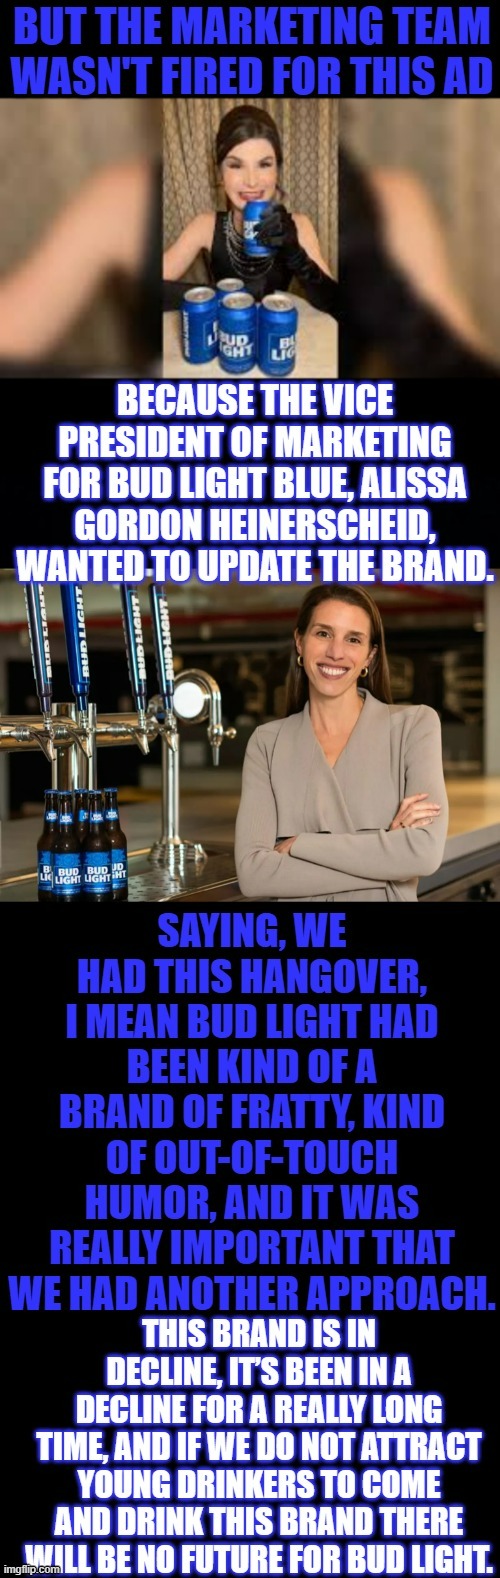 Not Sure If This Is Working...Budweiser Stock Drops 5 BILLION DOLLARS Recently | image tagged in memes,politics,budweiser,marketing,vice president,advertisement | made w/ Imgflip meme maker